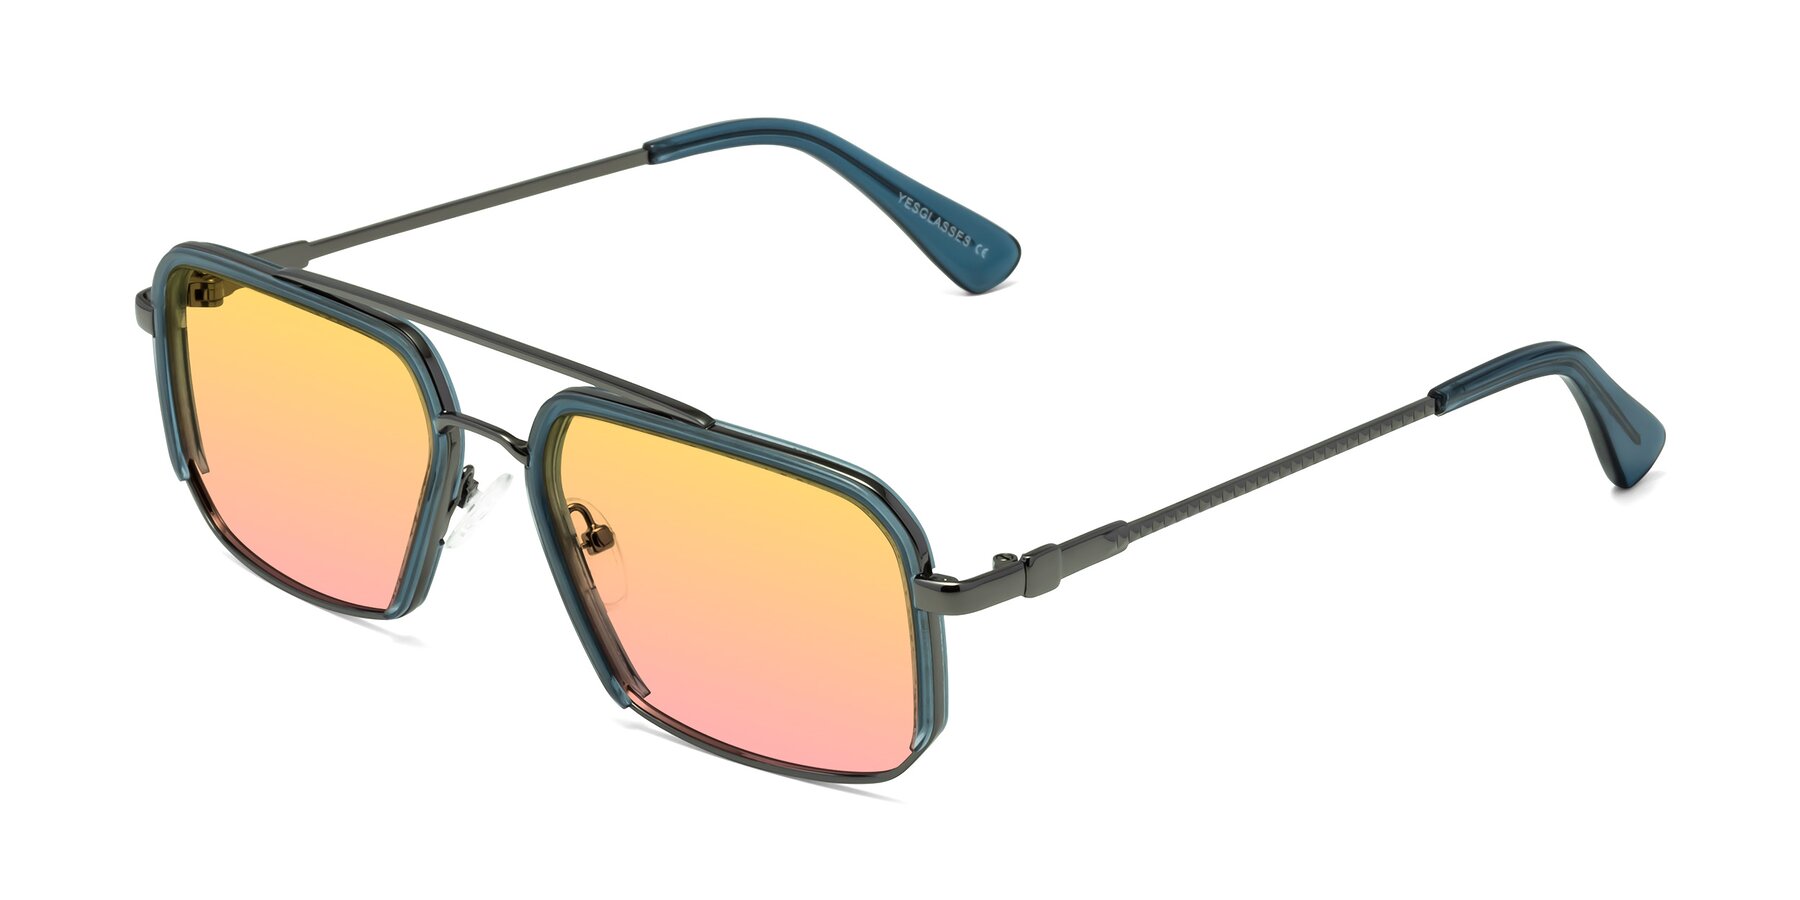 Angle of Dechter in Teal-Gunmetal with Yellow / Pink Gradient Lenses